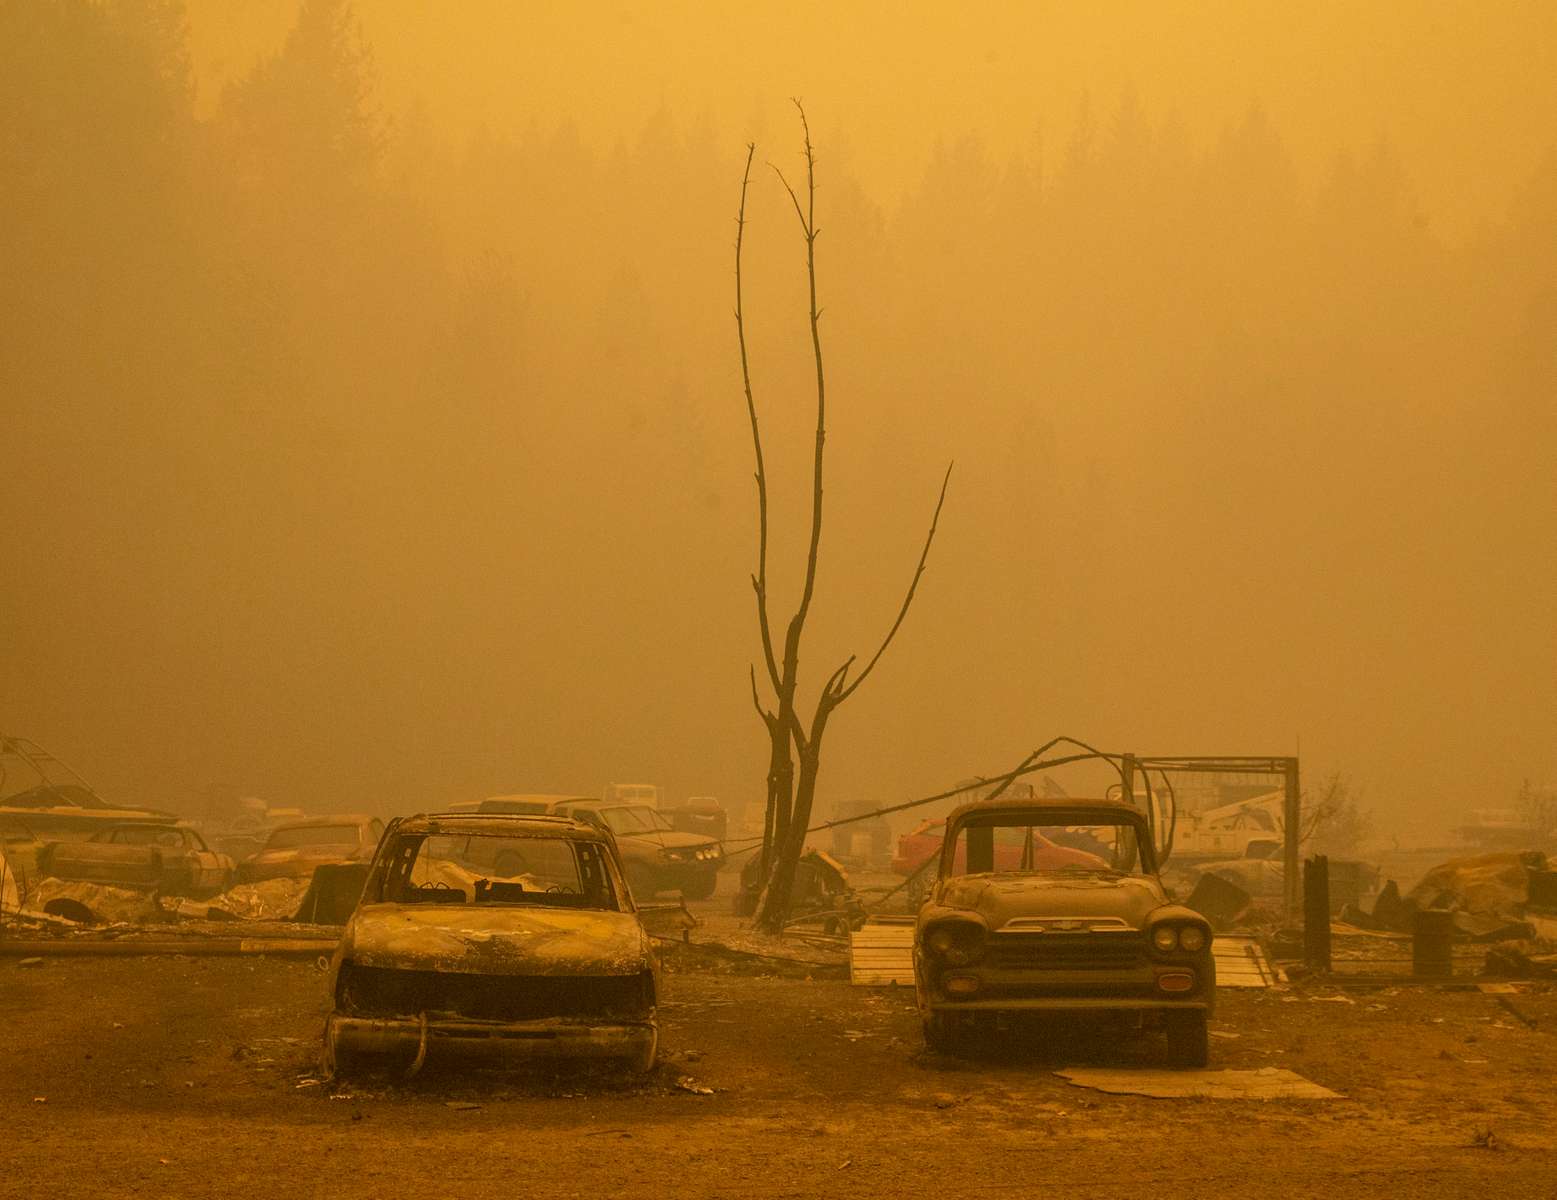 Vehicles burned in the Holiday Farm Fire sit outside a shop in Nimrod, Oregon on September, 10, 2020.